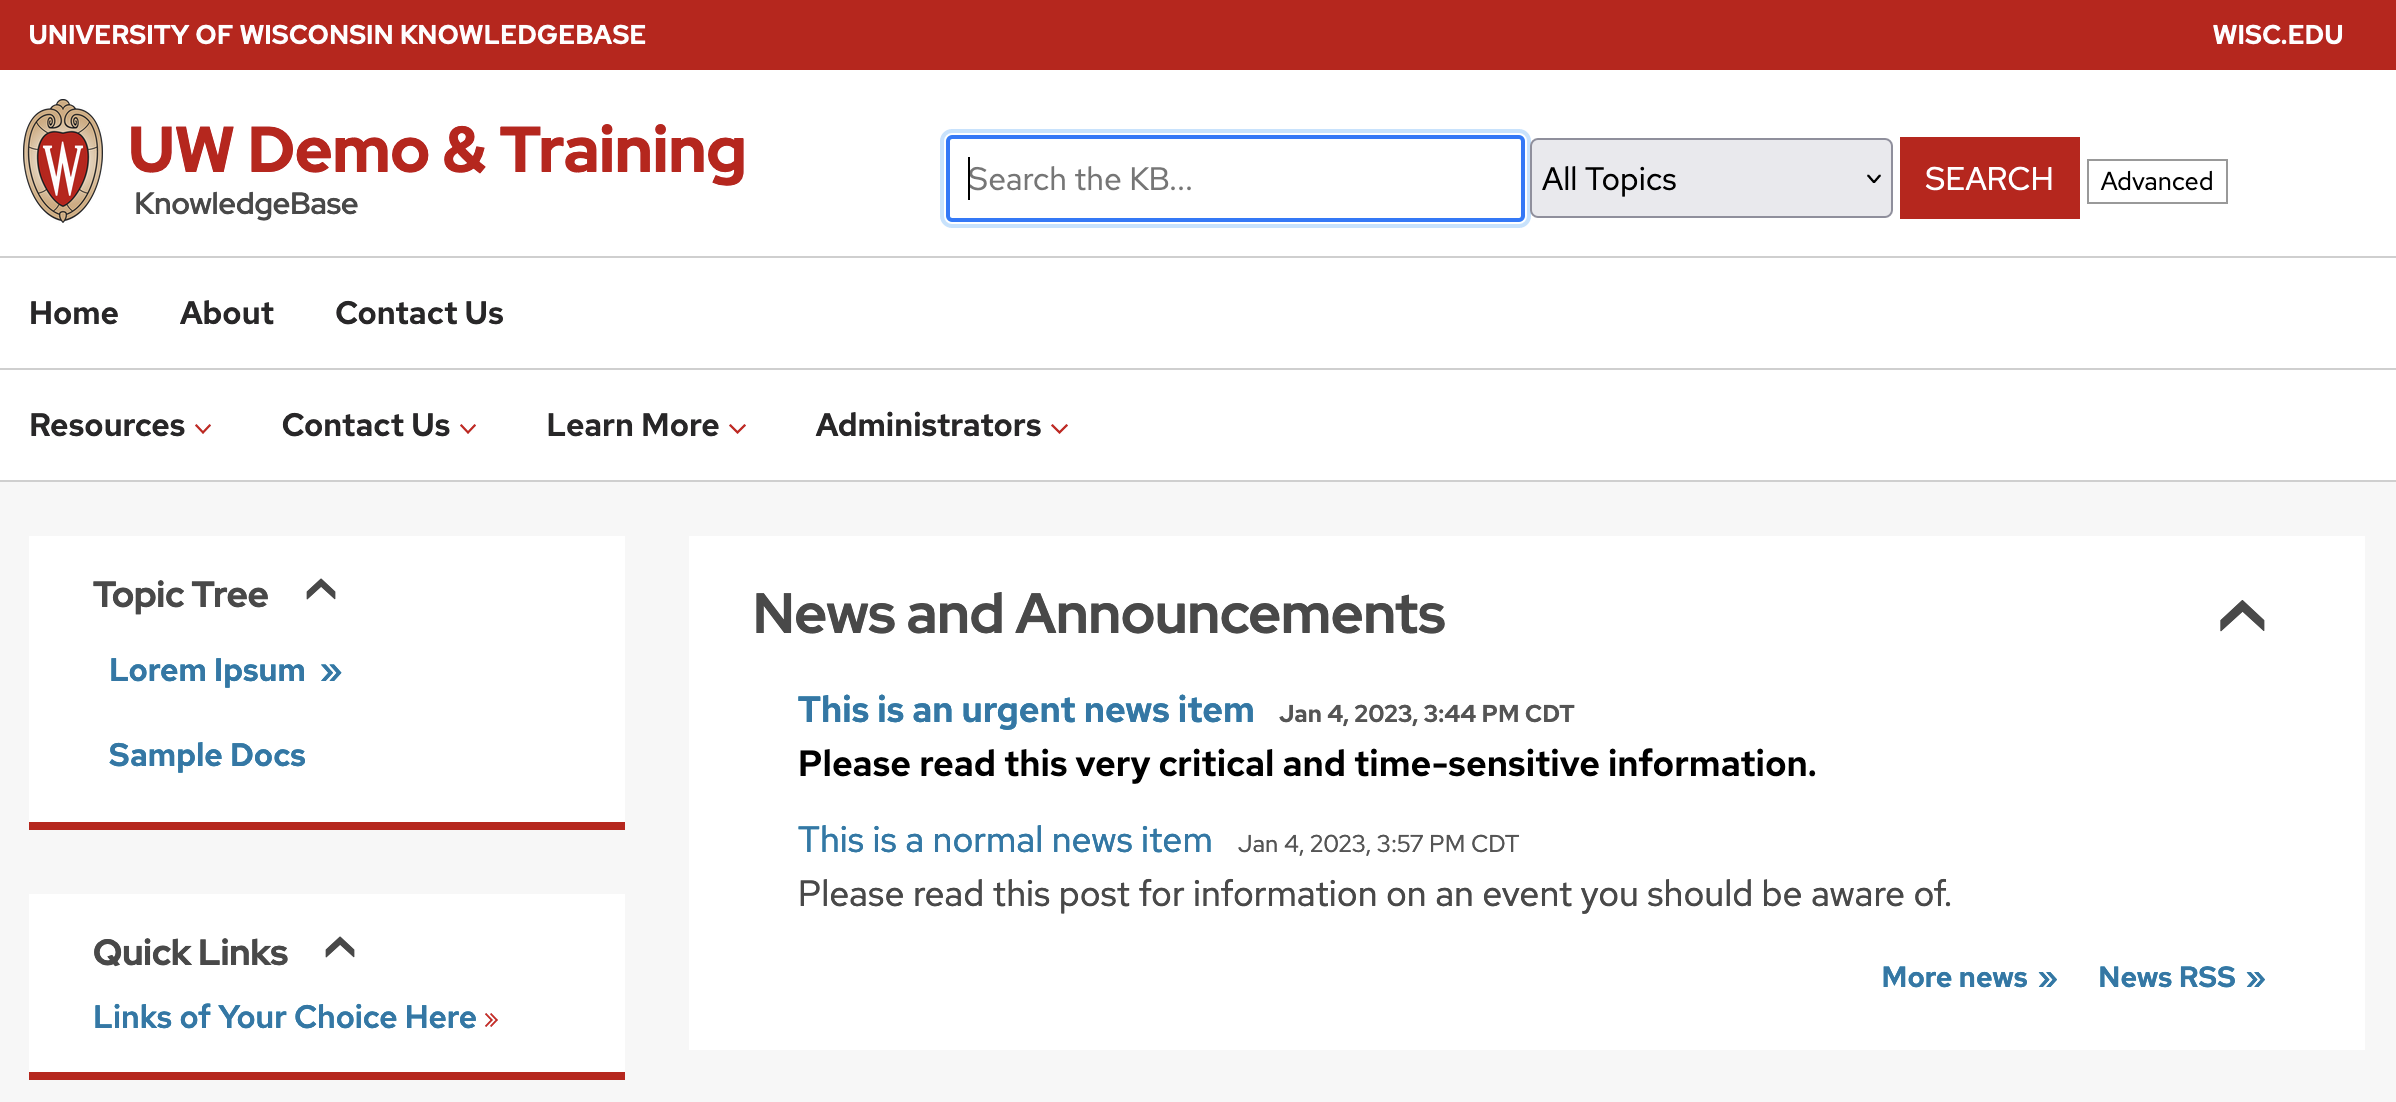 The News content module is named "News and Announcements" and displays News item titles and summaries as links.